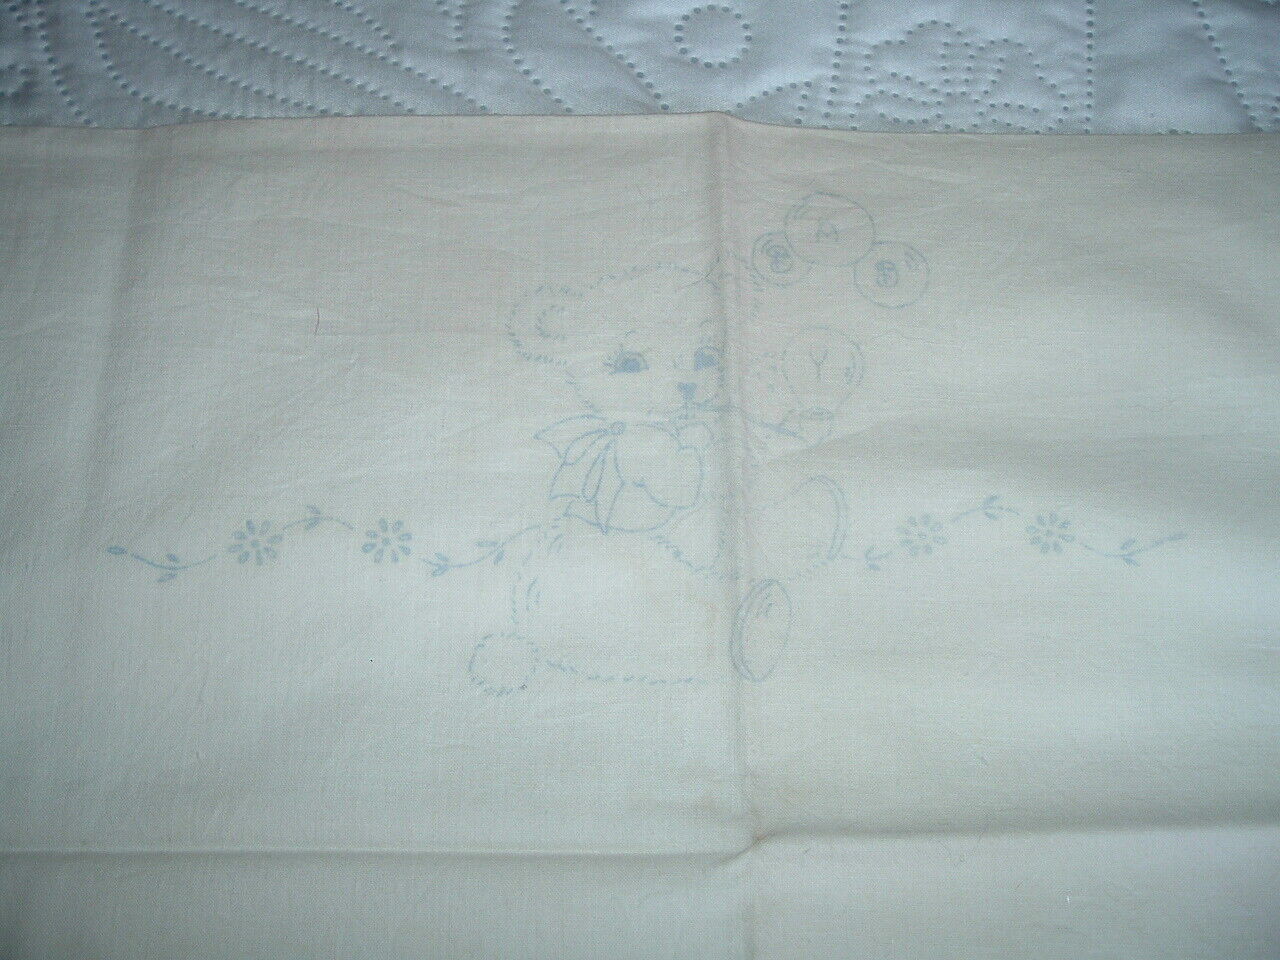 Vtg 30s Betsy Ross Baby Bear Bubbles Pillowcase Stamped Embroidery 17x11 PB11